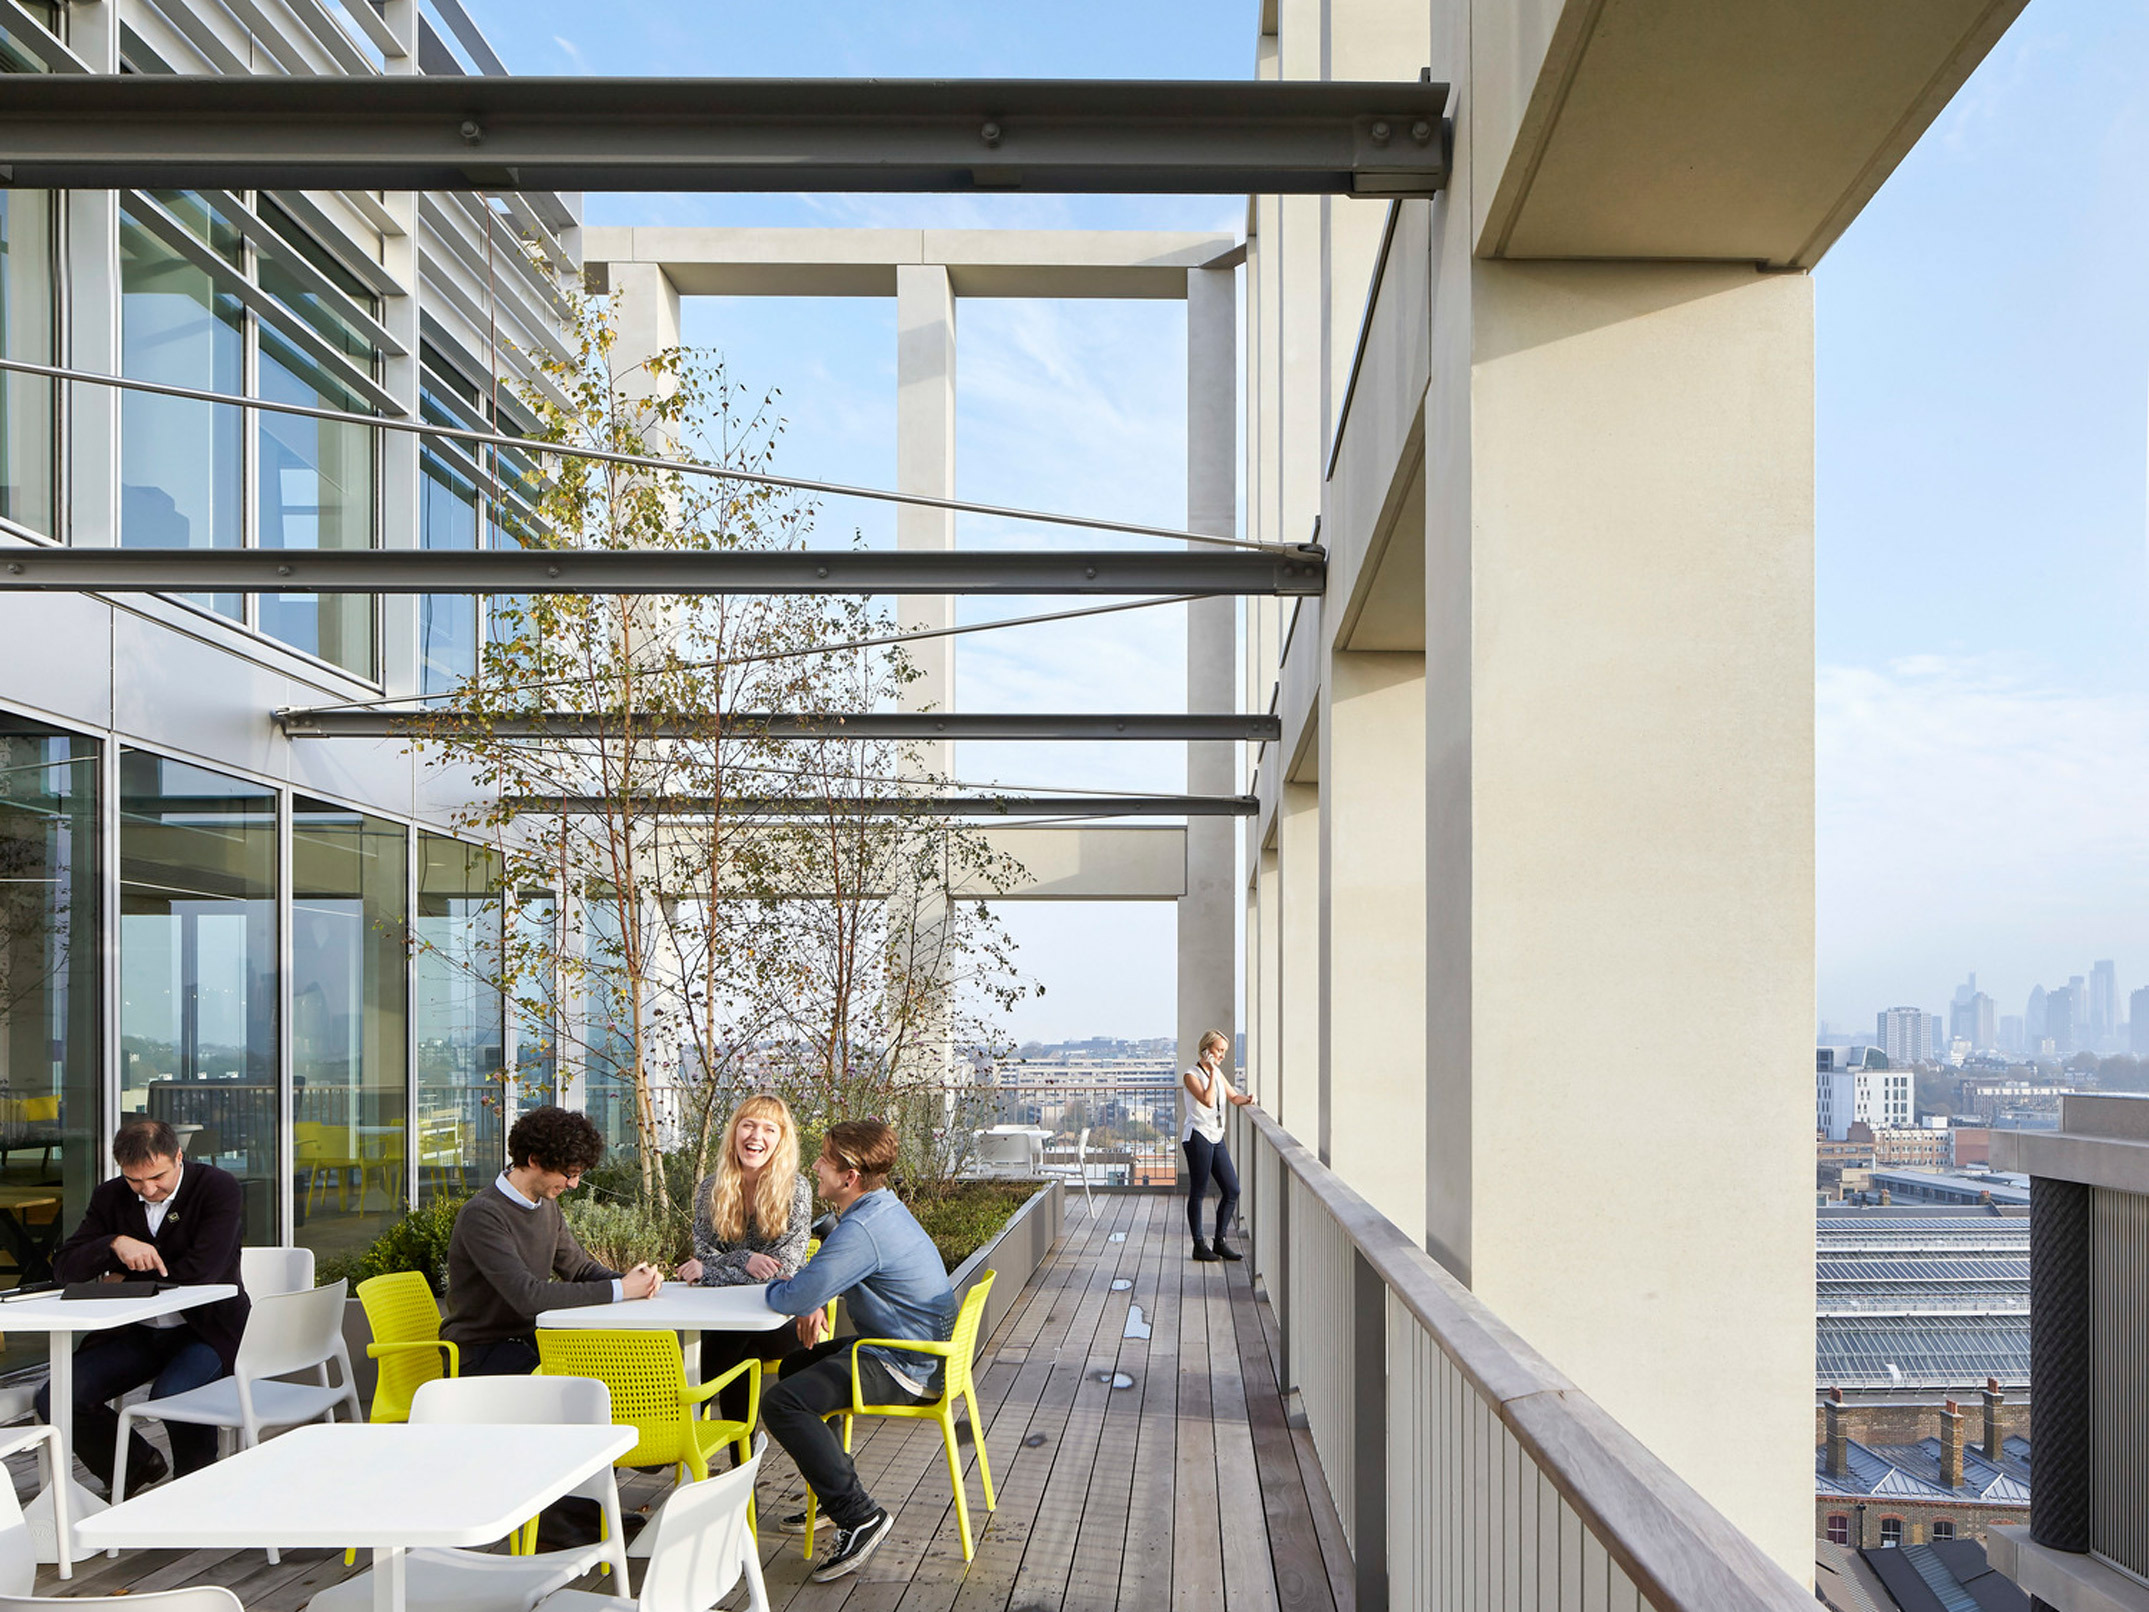 Contemporary urban balcony featuring glass railing, steel supports, and minimalist furniture with pops of color. Lush greenery accents the space, overlooking a cityscape under a clear sky. People engage in relaxed conversation, embodying a seamless blend of natural elements in a modern setting.